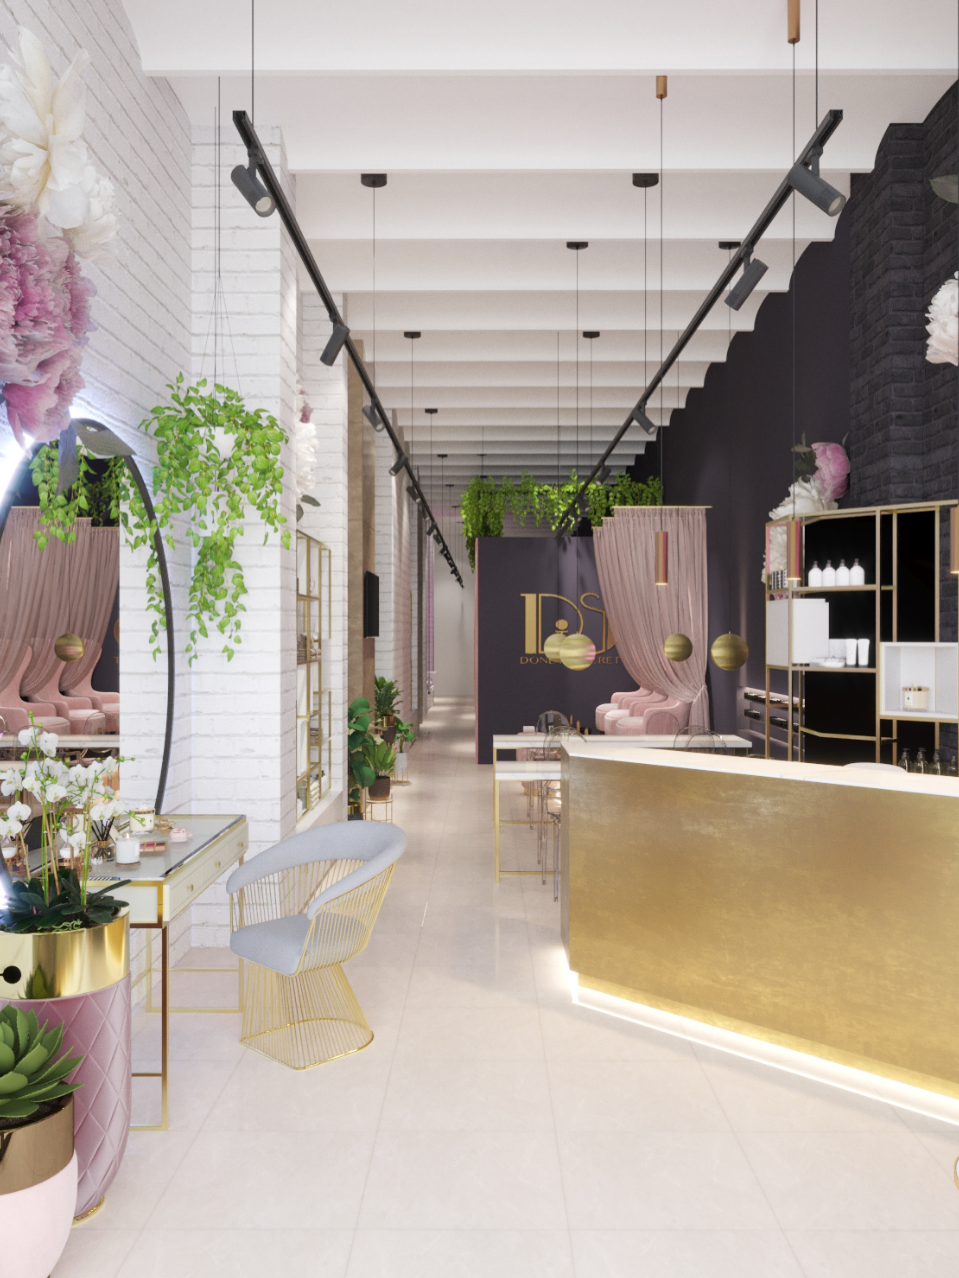 Beauty in Every Detail: Exquisite Salon Interior Designs